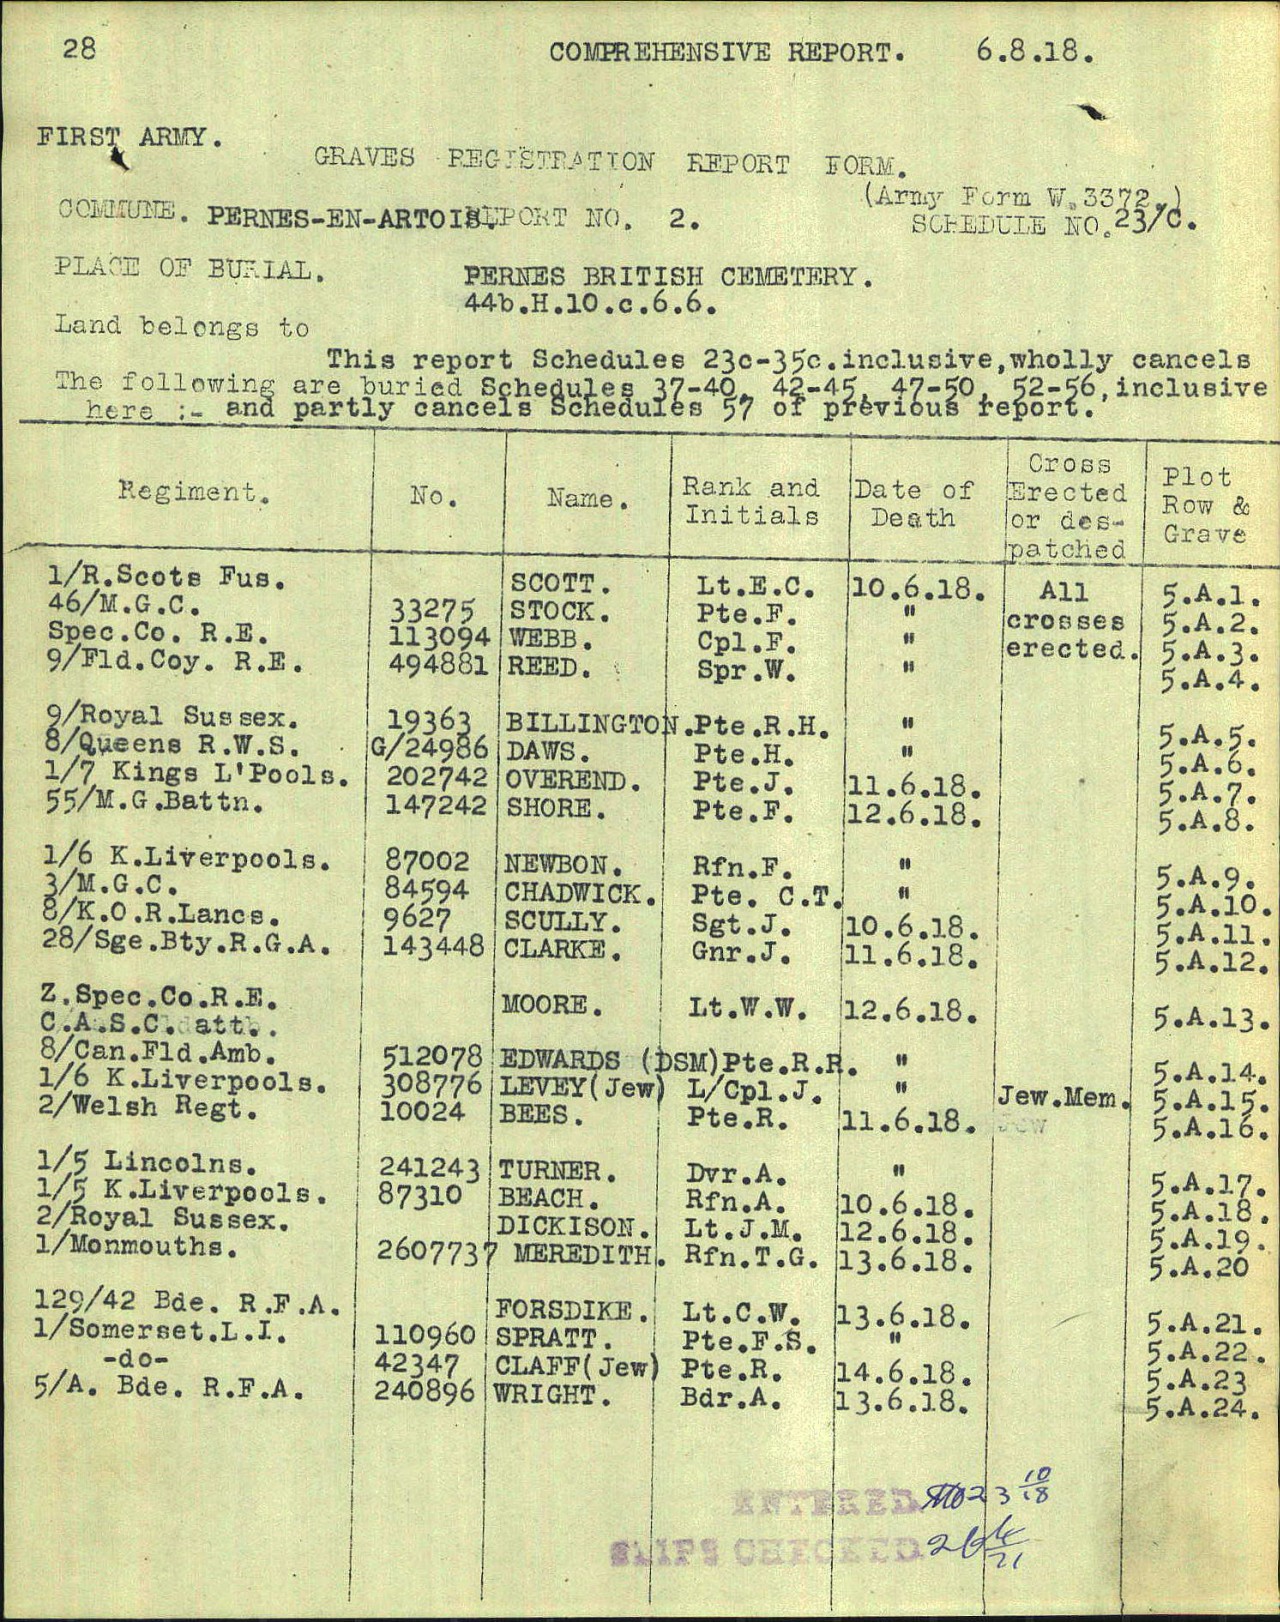 Pernes British Cemetery record for Frederick Webb